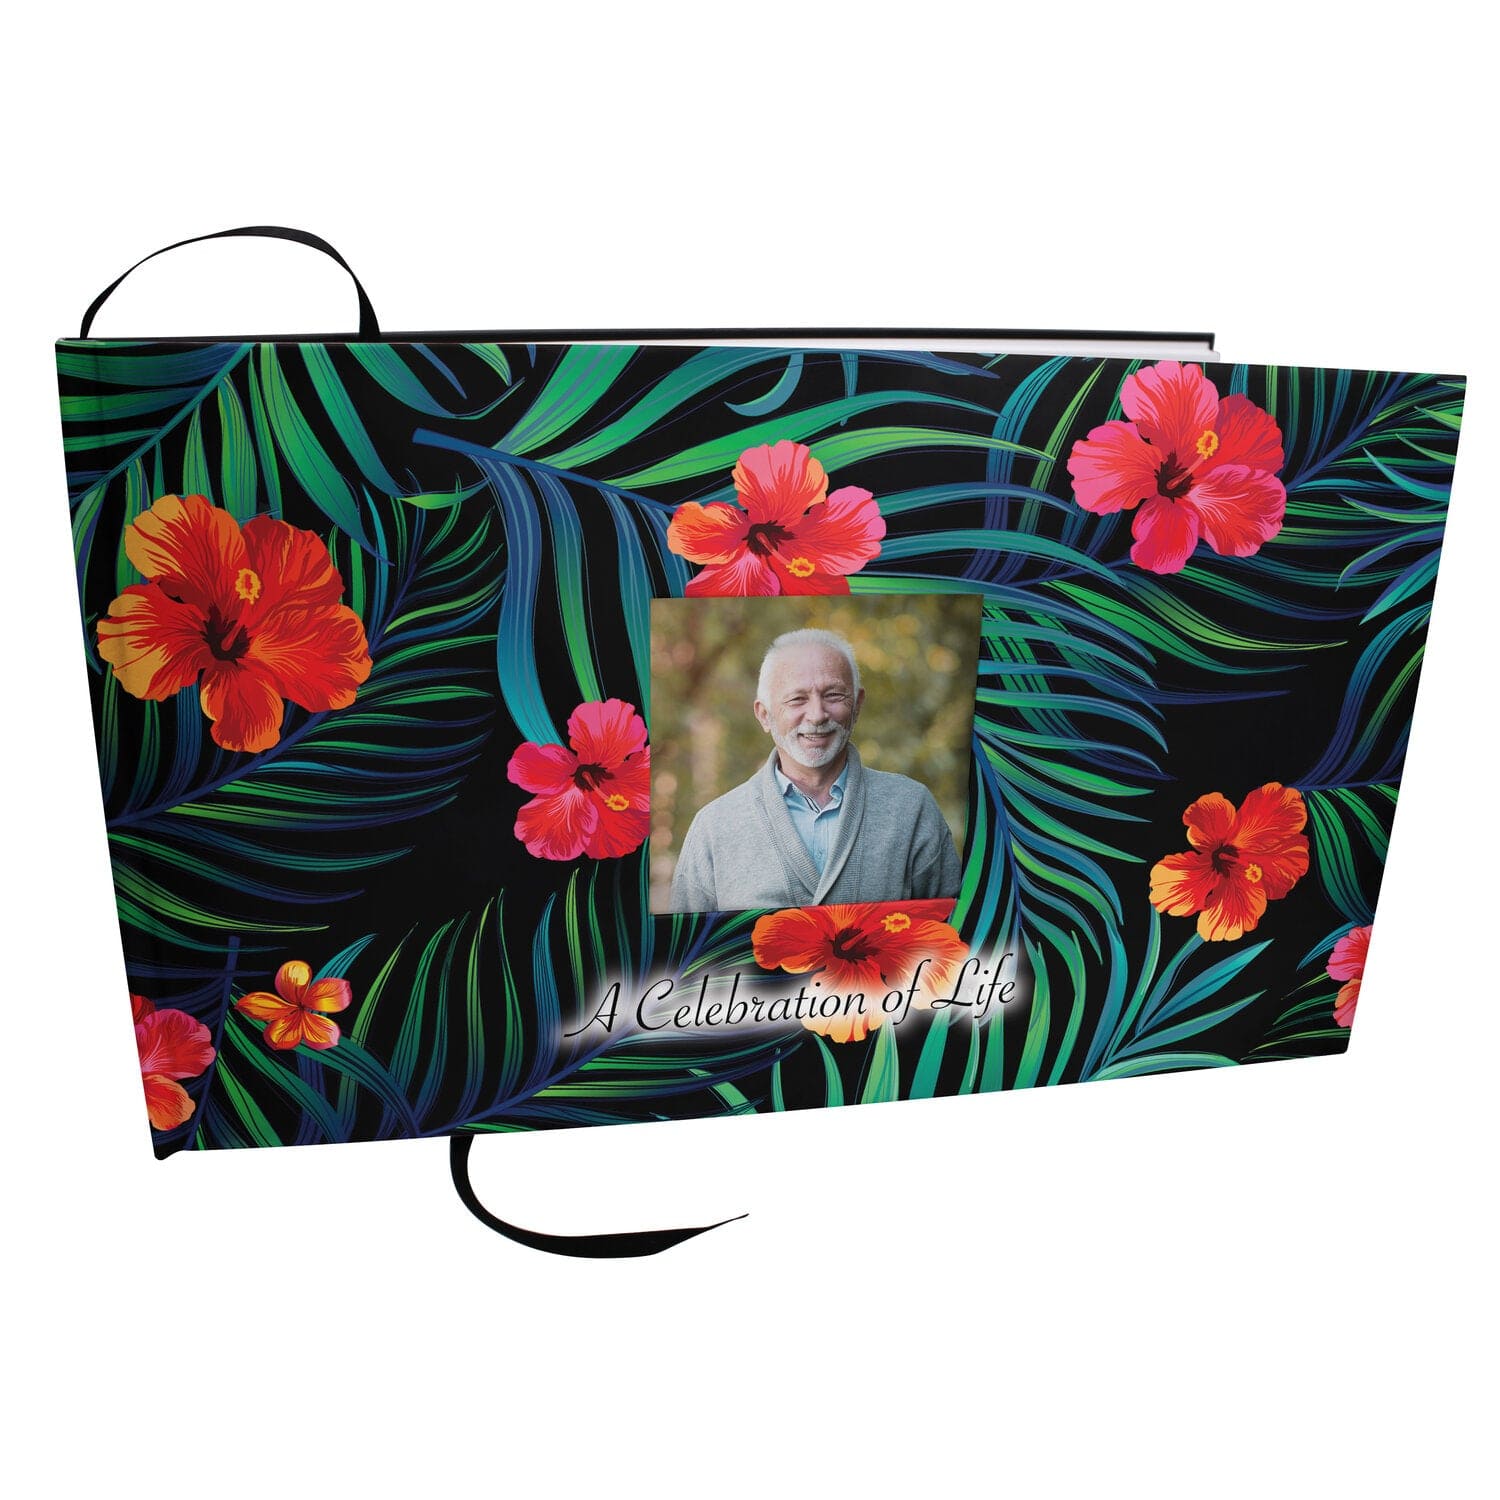 Commemorative Cremation Urns Tropical Matching Themed 'Celebration of Life' Guest Book for Funeral or Memorial Service